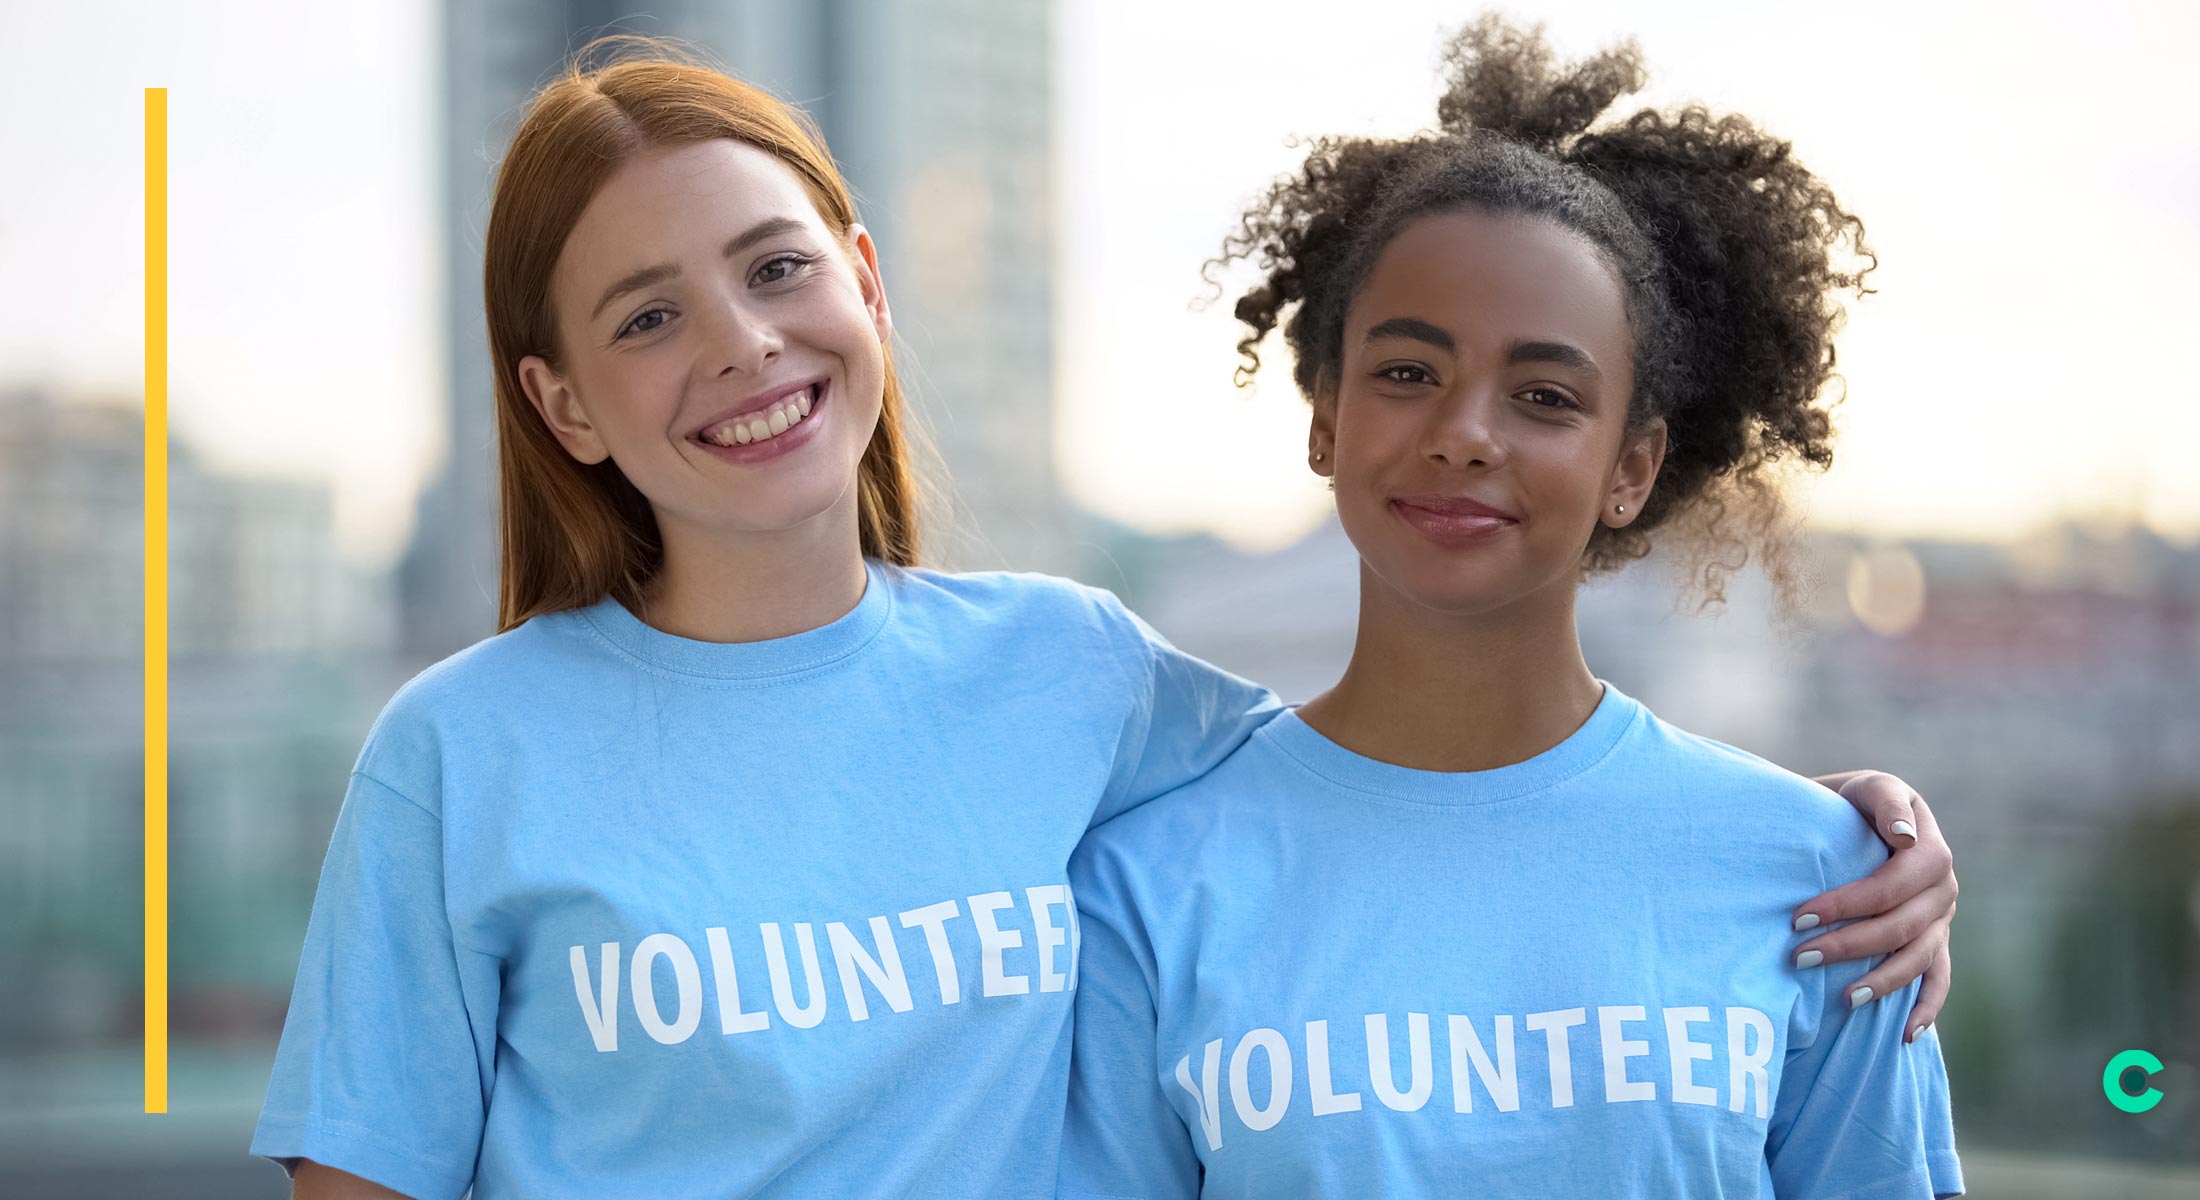 Two young woman are wearing blue shirts with "Volunteer" written on the front